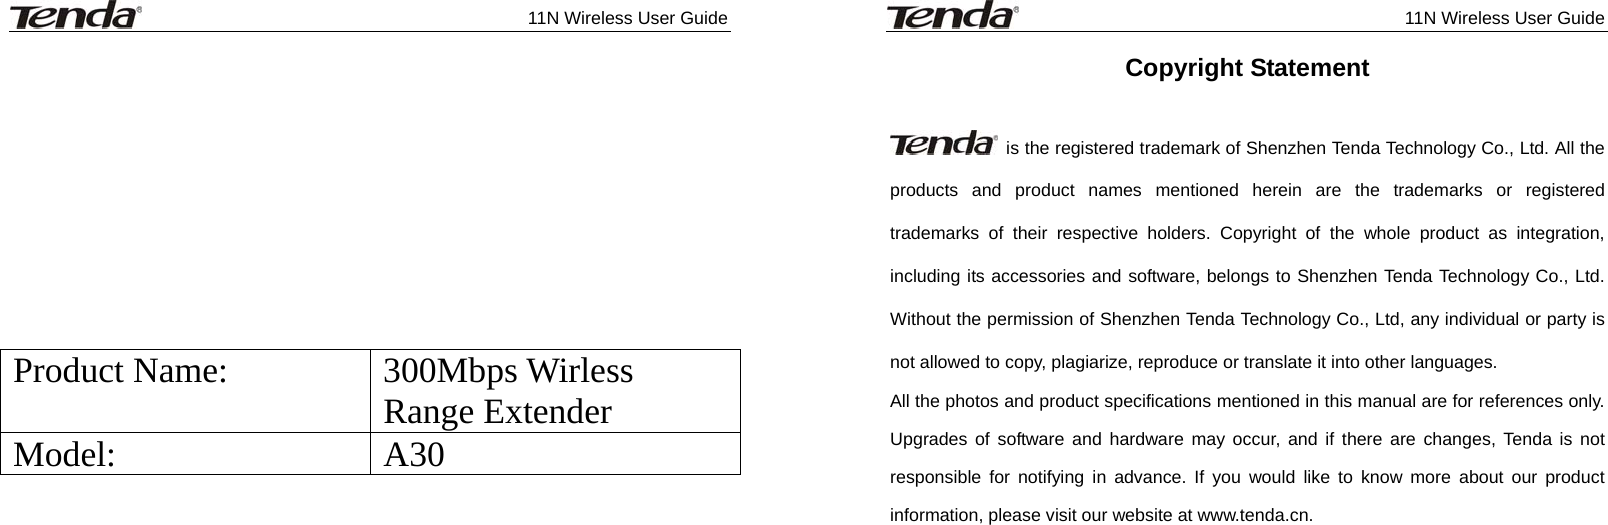              11N Wireless User Guide              Product Name:  300Mbps Wirless Range Extender Model: A30              11N Wireless User Guide  Copyright Statement    is the registered trademark of Shenzhen Tenda Technology Co., Ltd. All the products and product names mentioned herein are the trademarks or registered trademarks of their respective holders. Copyright of the whole product as integration, including its accessories and software, belongs to Shenzhen Tenda Technology Co., Ltd. Without the permission of Shenzhen Tenda Technology Co., Ltd, any individual or party is not allowed to copy, plagiarize, reproduce or translate it into other languages. All the photos and product specifications mentioned in this manual are for references only. Upgrades of software and hardware may occur, and if there are changes, Tenda is not responsible for notifying in advance. If you would like to know more about our product information, please visit our website at www.tenda.cn.    